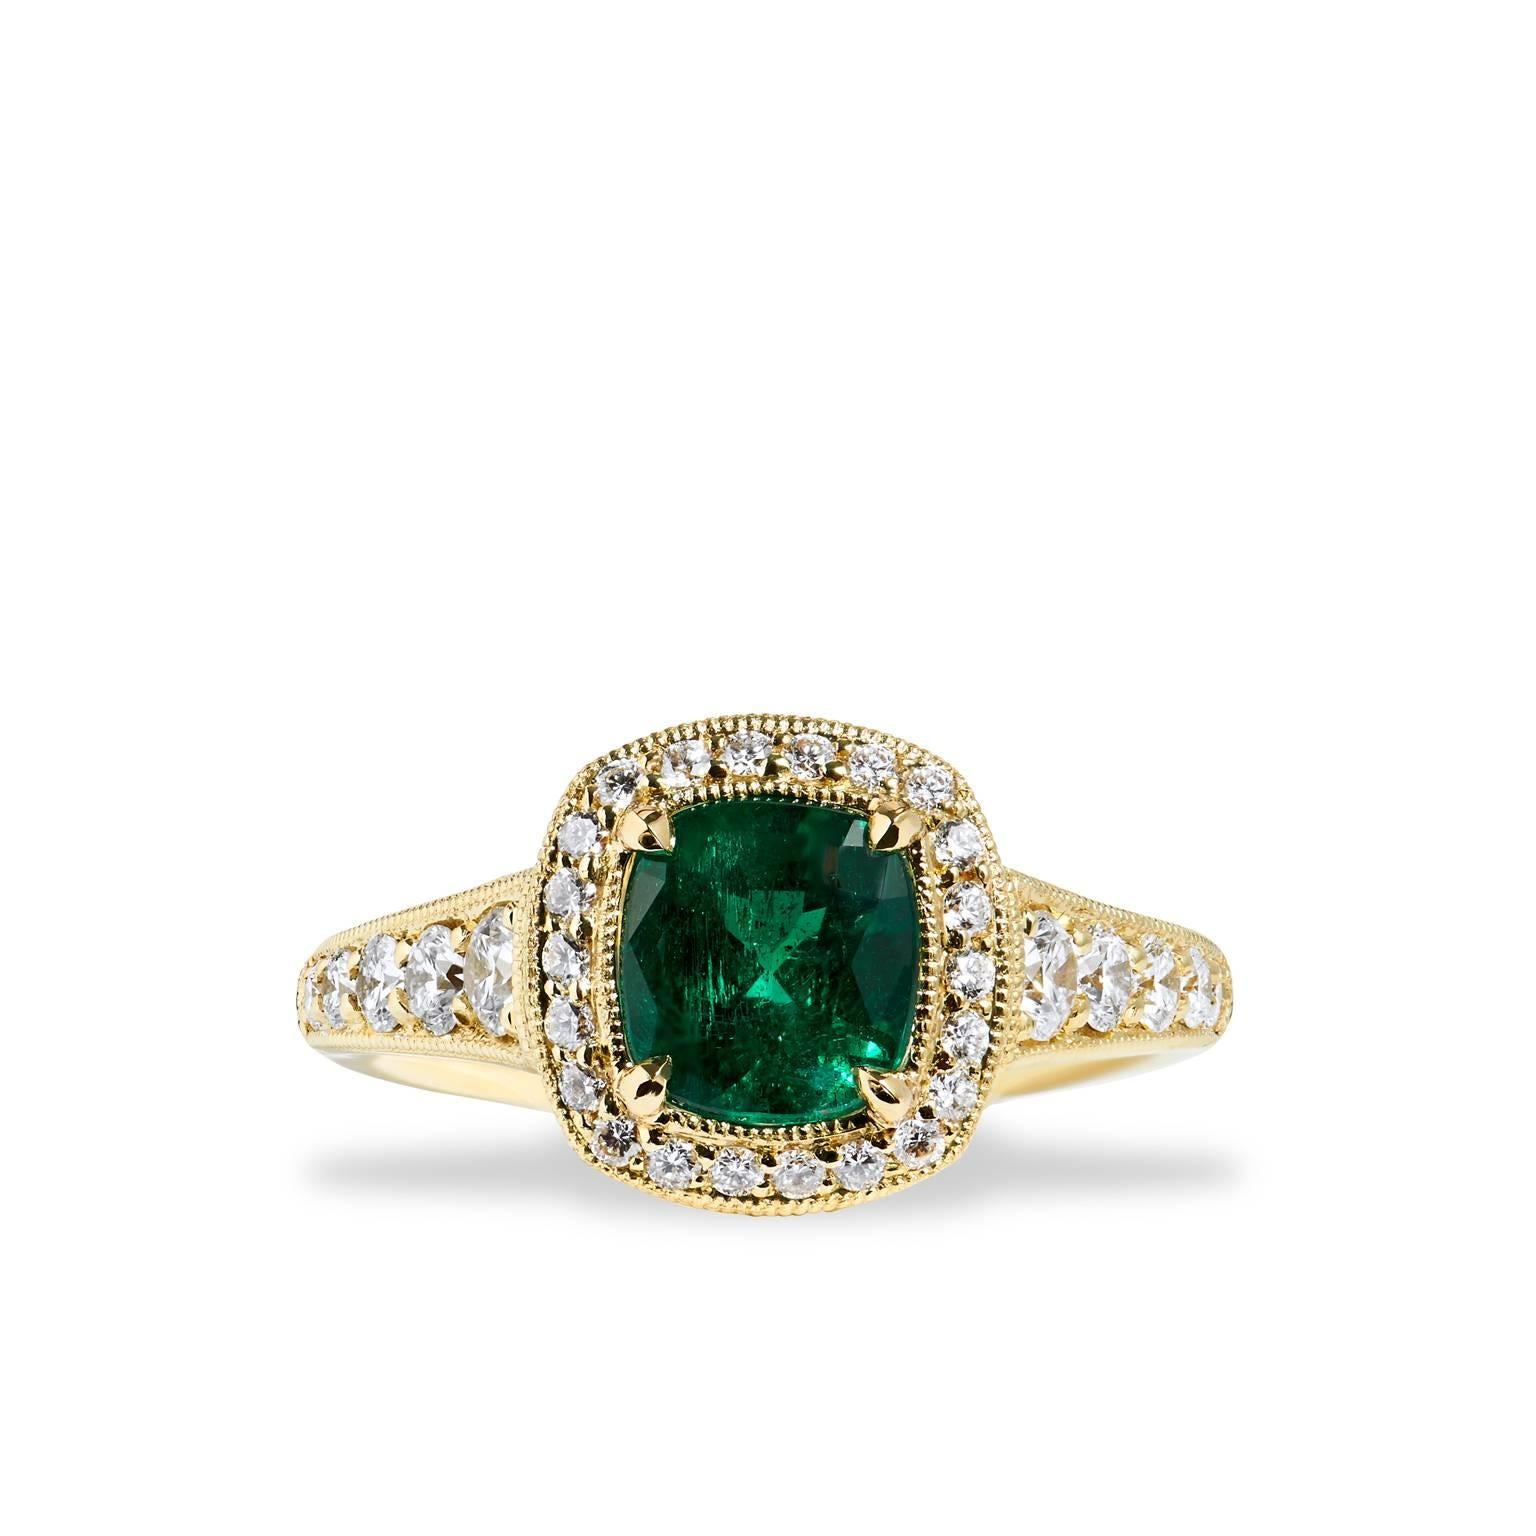 GIA Certified 1.18 carat No Treatment Emerald and Diamond Halo 18 karat Yellow Gold 

Unique is the true definition of this piece. A one-of-a- kind, handmade by H&H Jewels, this is truly a show stopping design.  
This ring is crafted in 18 karat